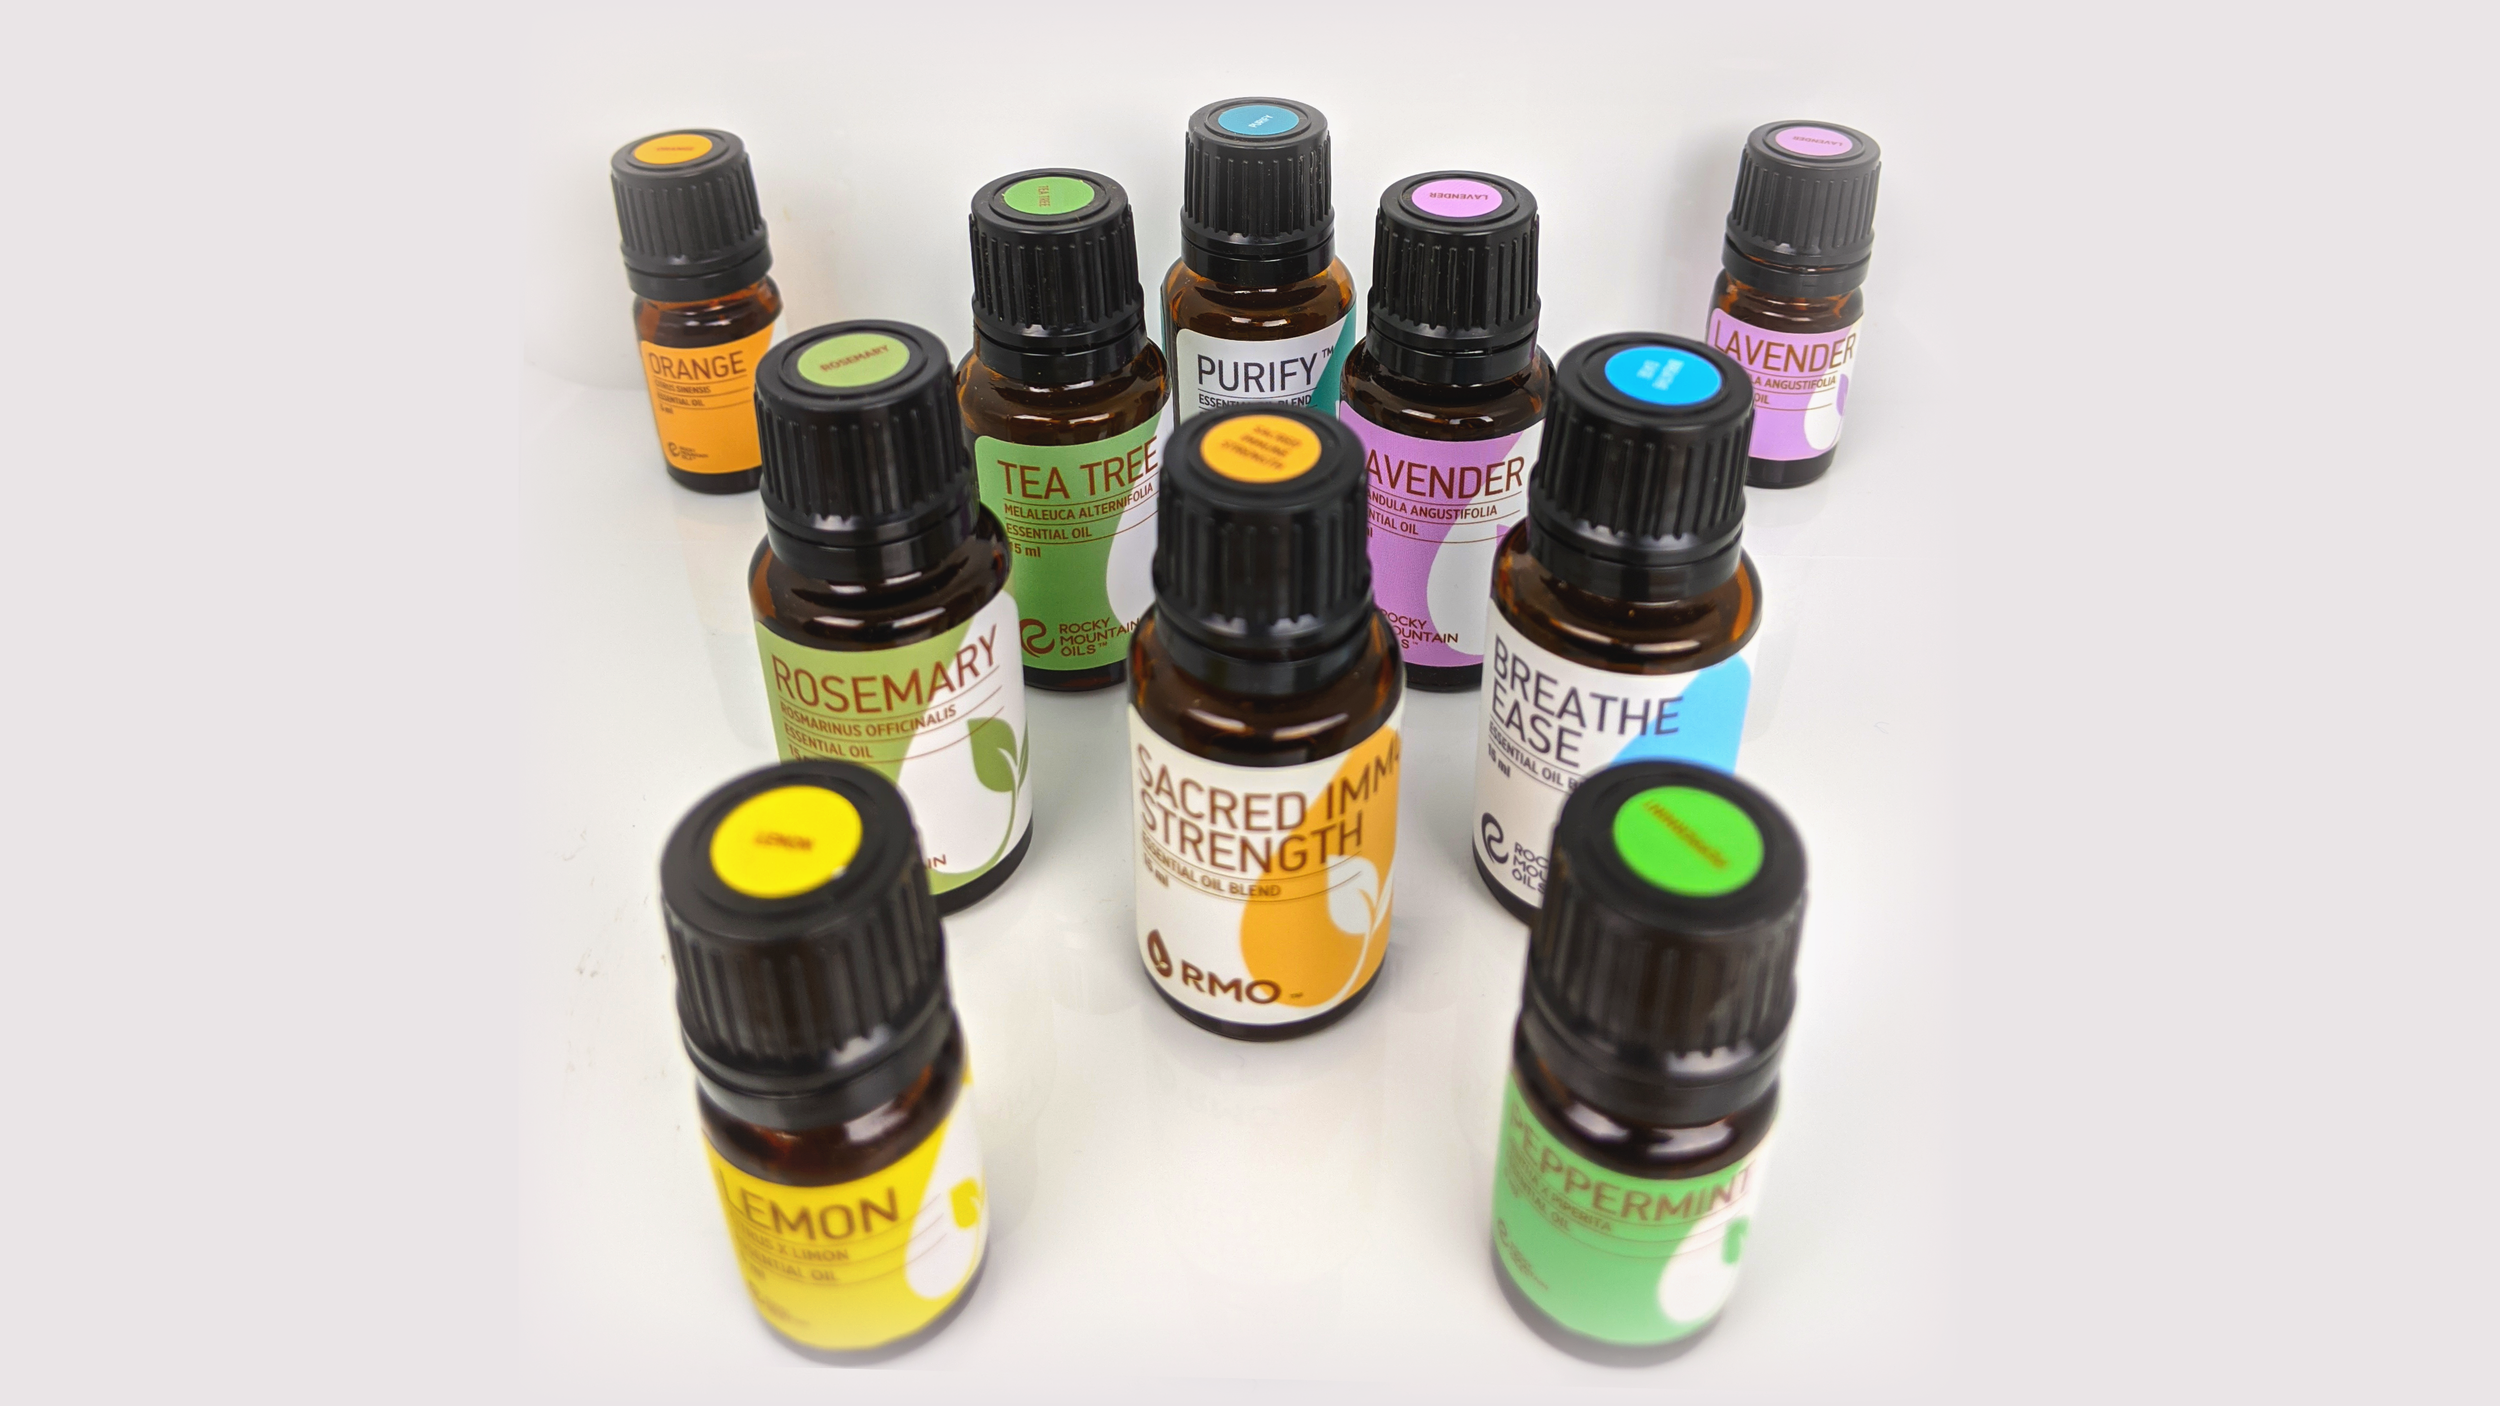 Rocky Mountain Oils’ has the  best essential oils  for all your needs! I buy my oils and tools from RMO every time.